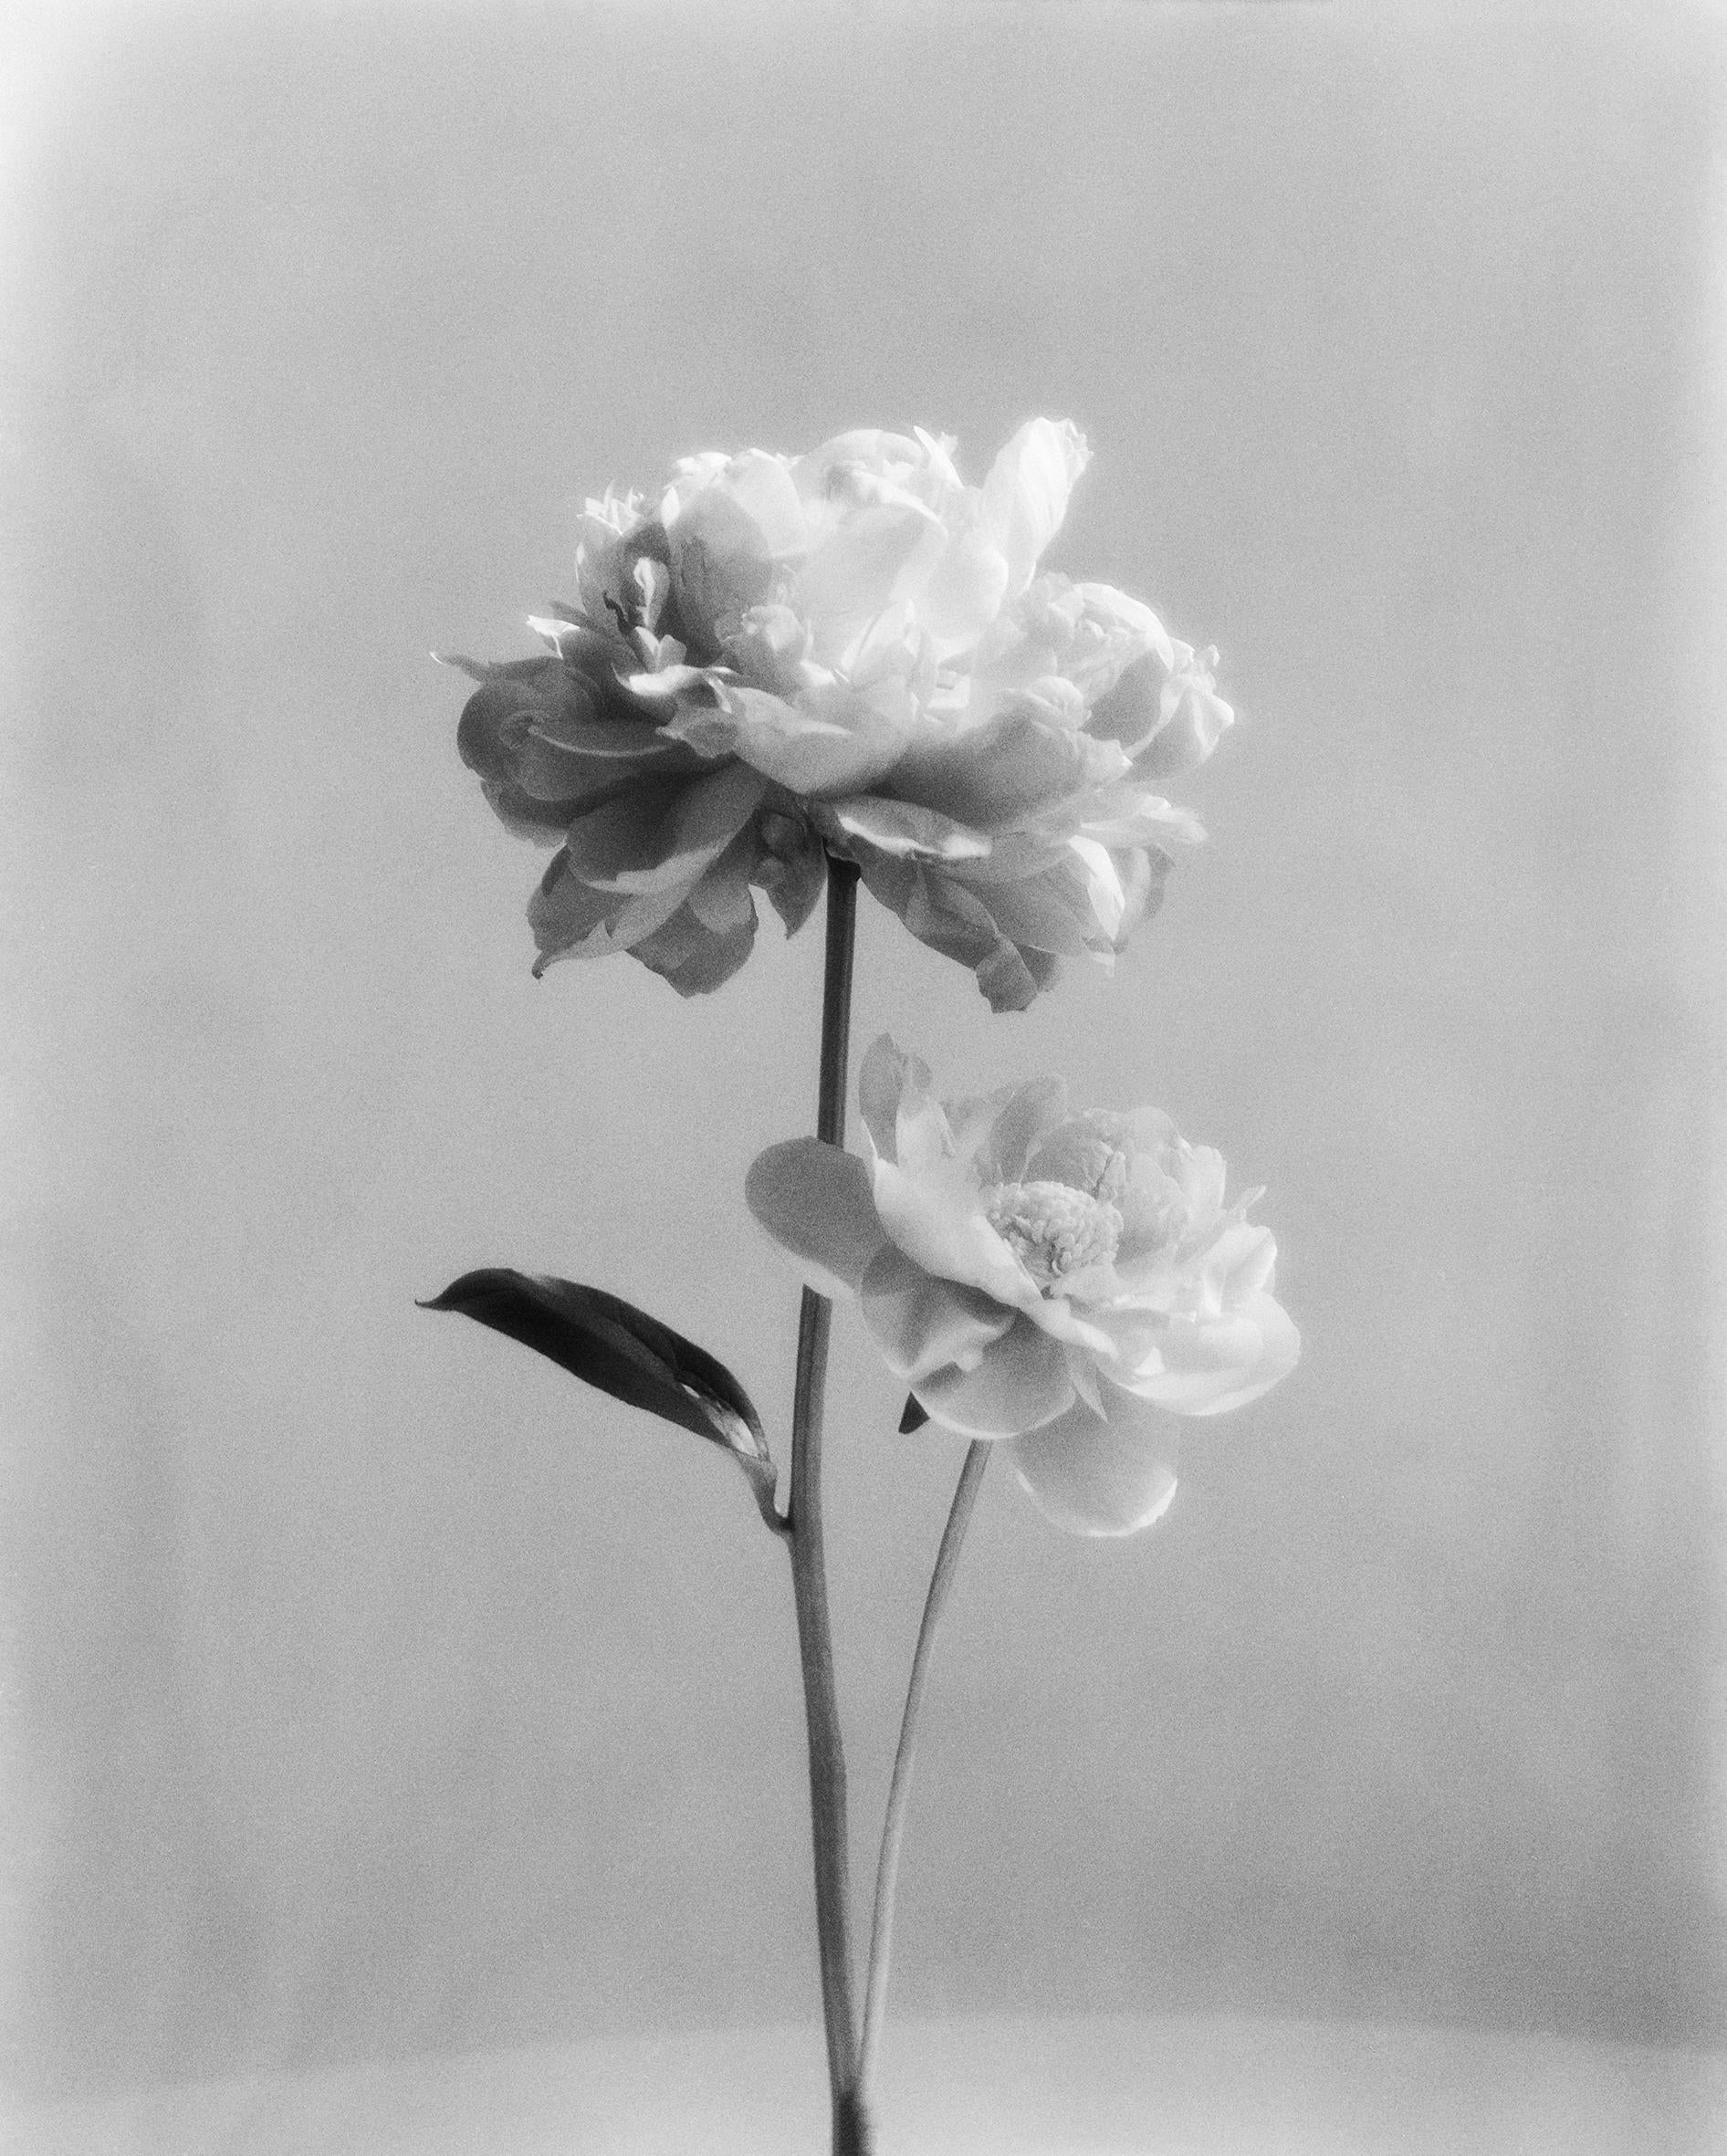 Peony no.2 - analogue black and white floral photography, limited edition 15